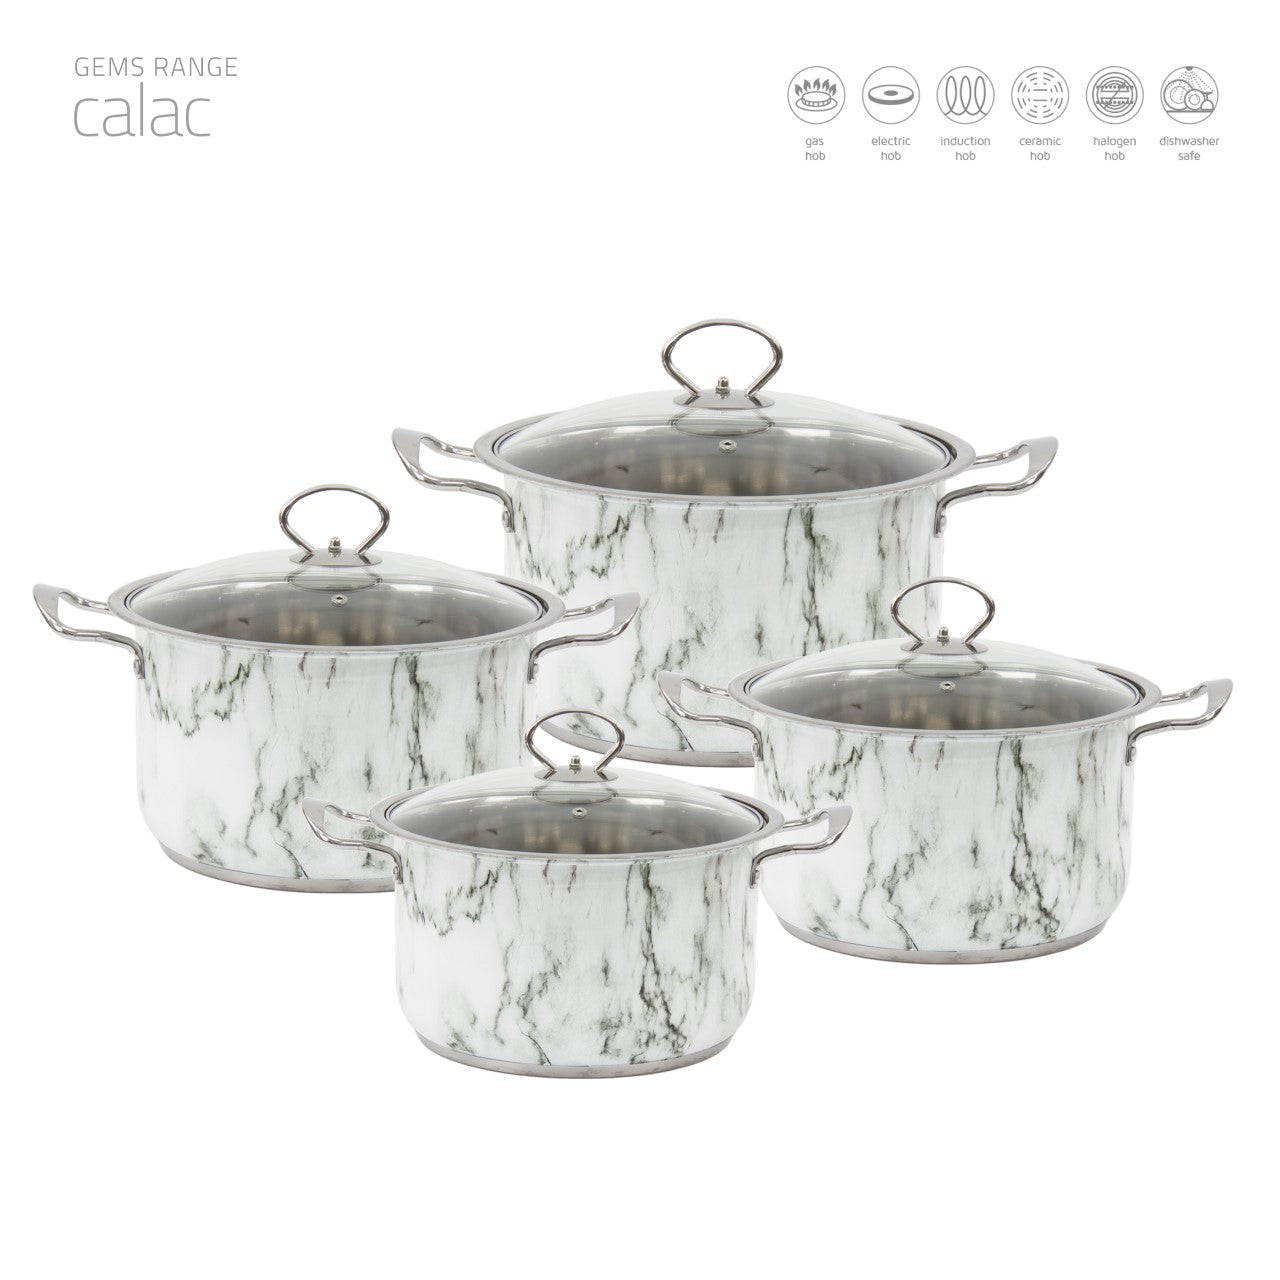 Gems Stainless Steel Stockpot Set 4pc Calac 18-20-22-24cm 9788 (Big Parcel Rate)